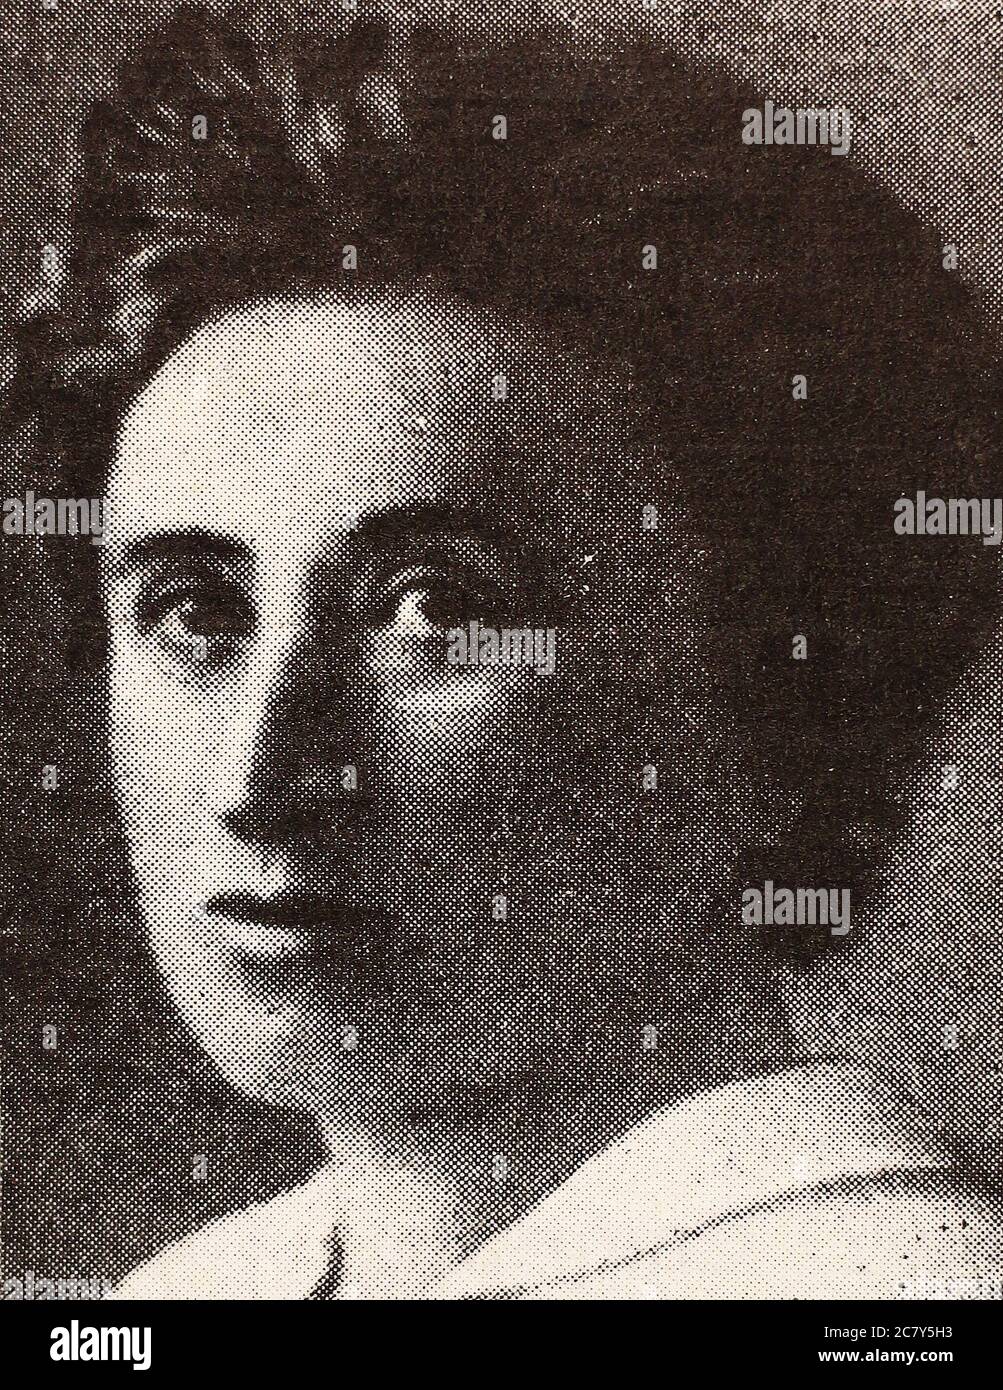 Rosa Luxemburg was a Polish Marxist, philosopher, economist, anti-war activist and revolutionary socialist who became a naturalized German citizen at the age of 28. Stock Photo